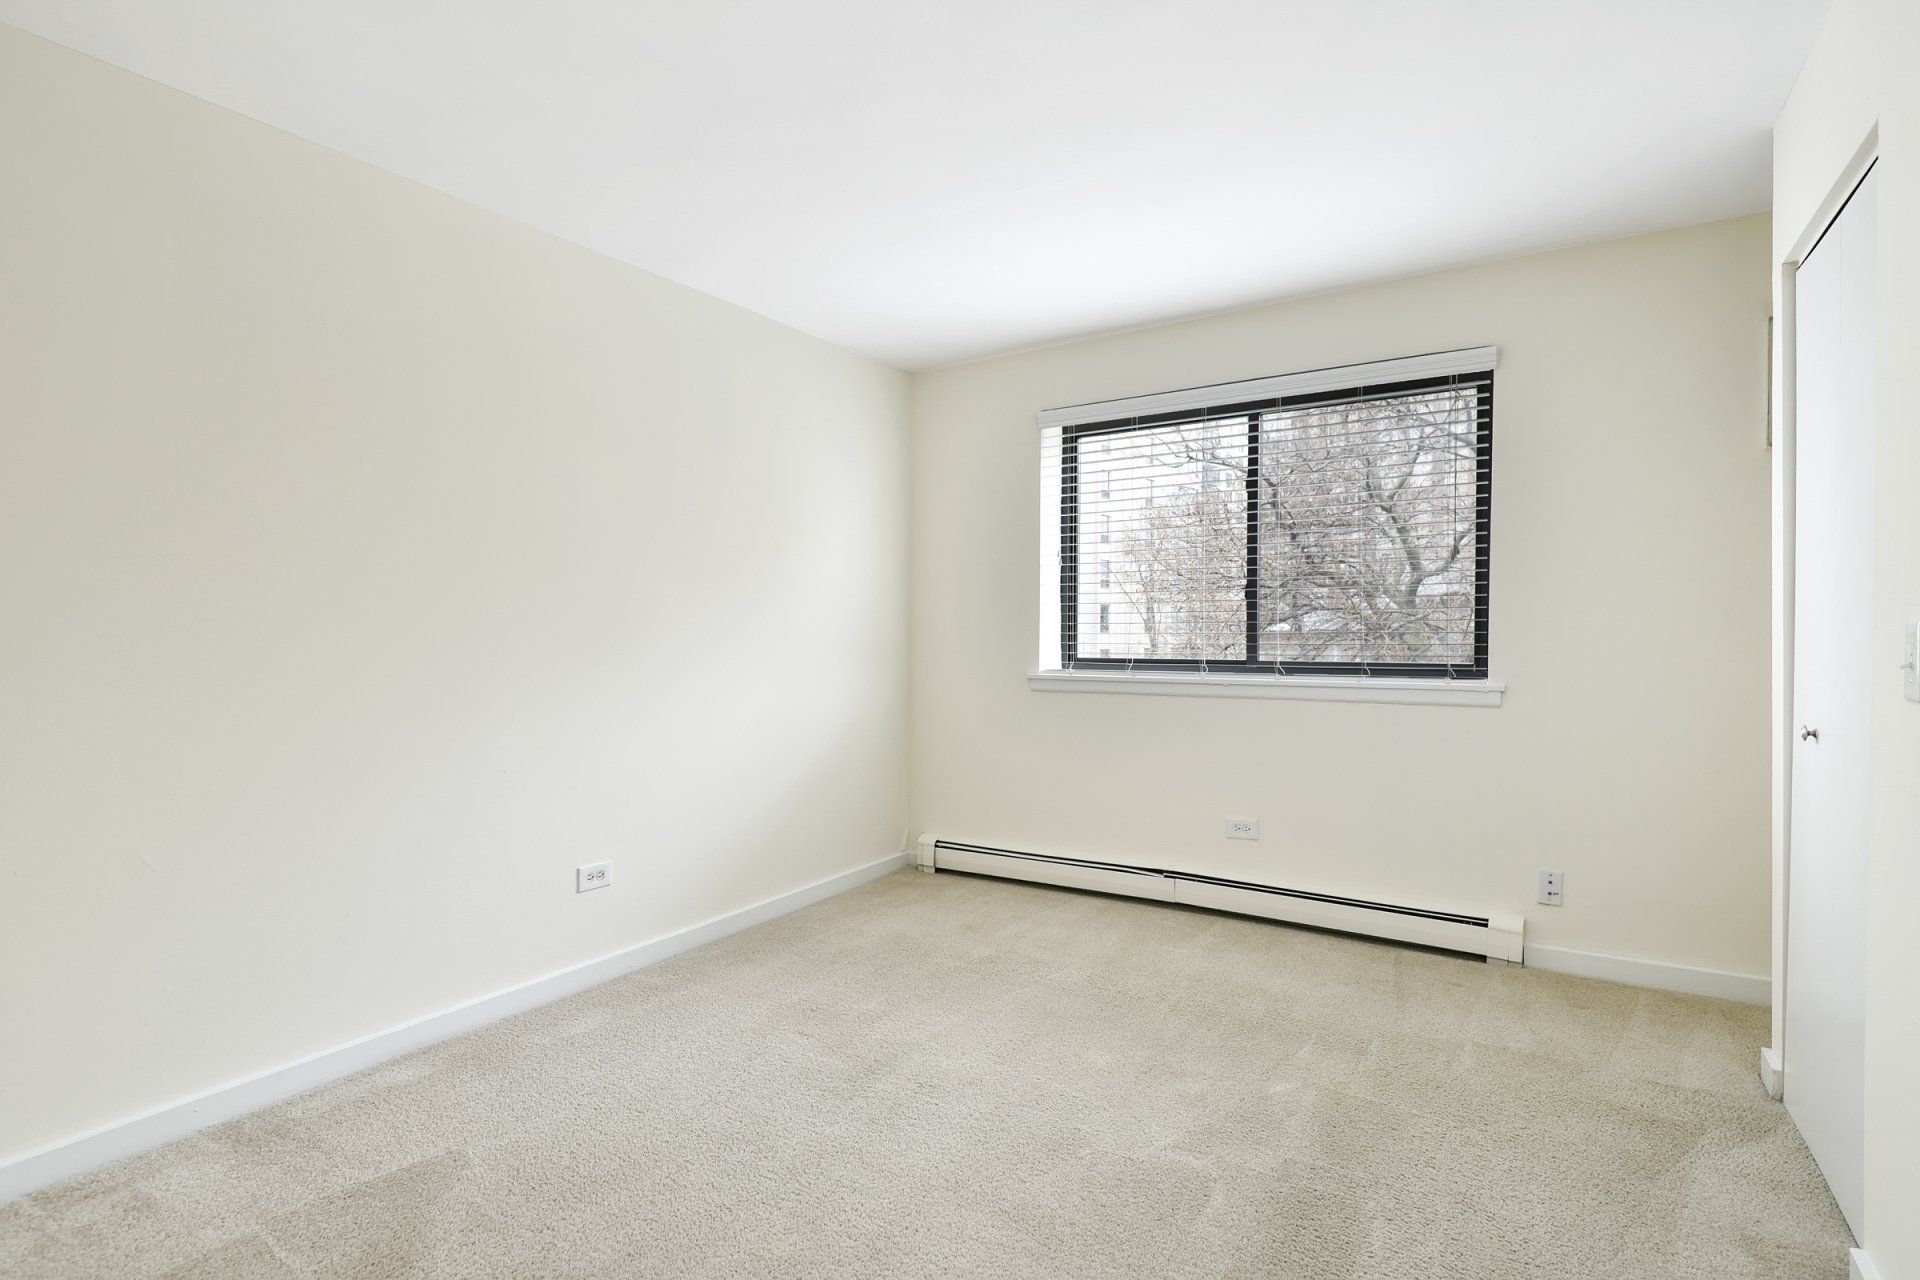 Room with carpet floors at Reside on Stratford.